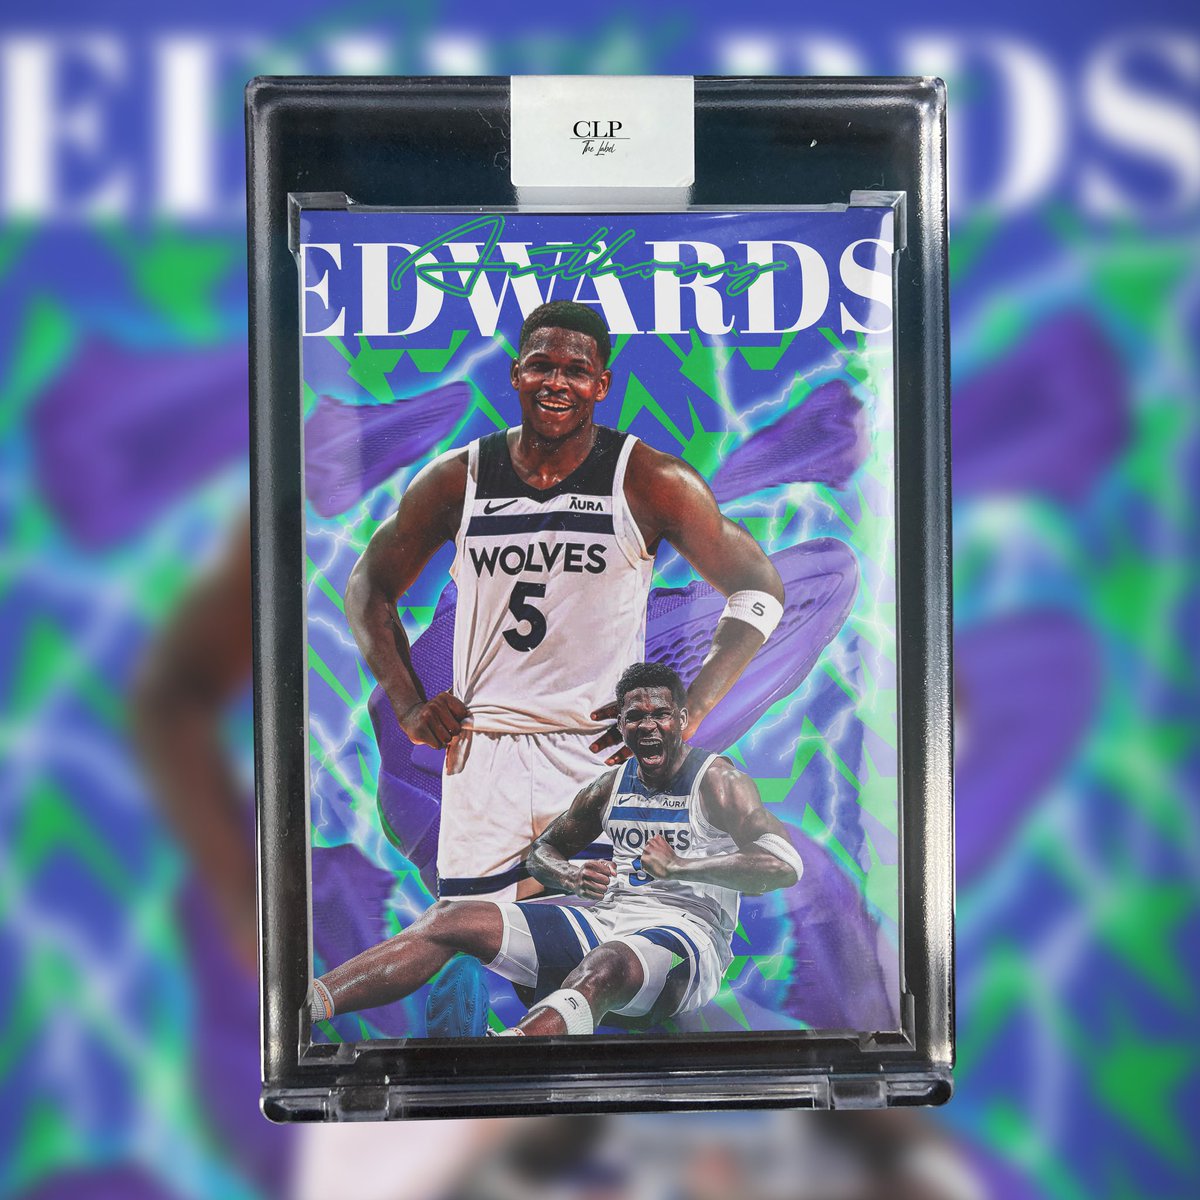 Anthony Edwards did not come to play !! First round sweep 🧹 this next series about to be 🔥🔥🔥
@adidasbasketball 

#anthonyedwards #anthonyedwardscards #anthonyedwardshighlights #sportscards #sportscardsedits #timberwolves #minnesotatimberwolves